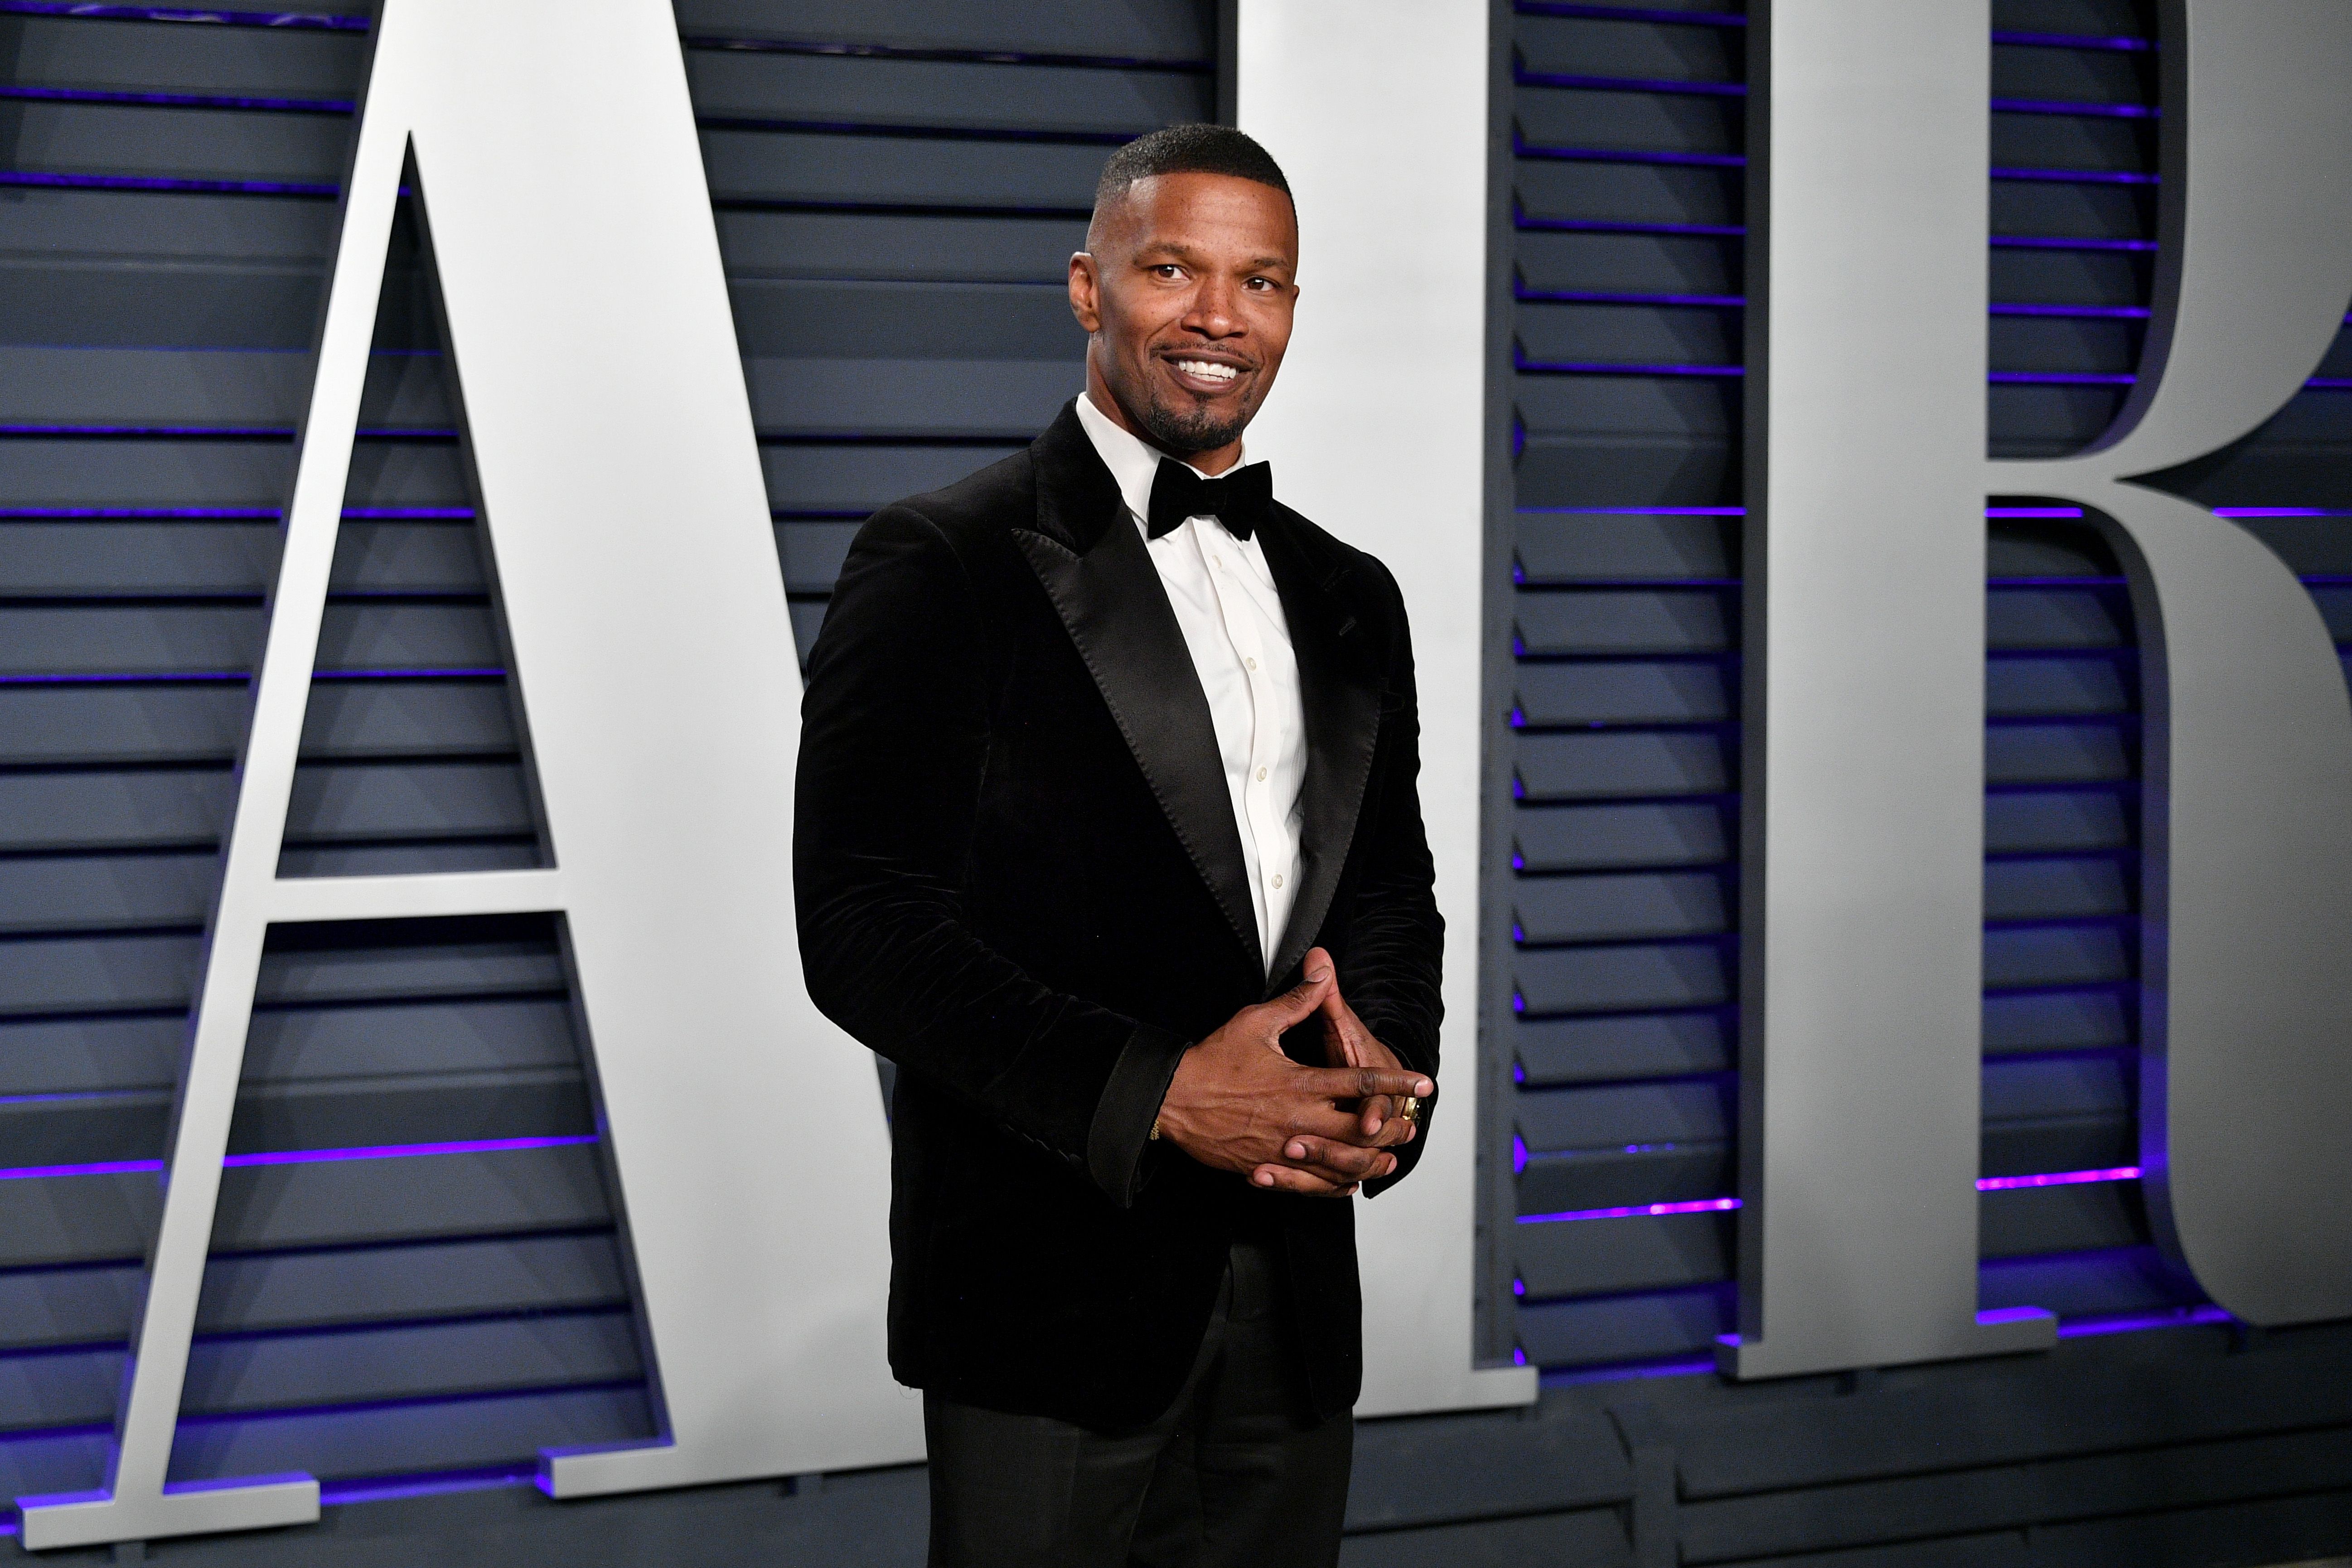 Jamie Foxx at the Vanity Fair Oscar Party on February 24, 2019 in California. | Photo: Getty Images